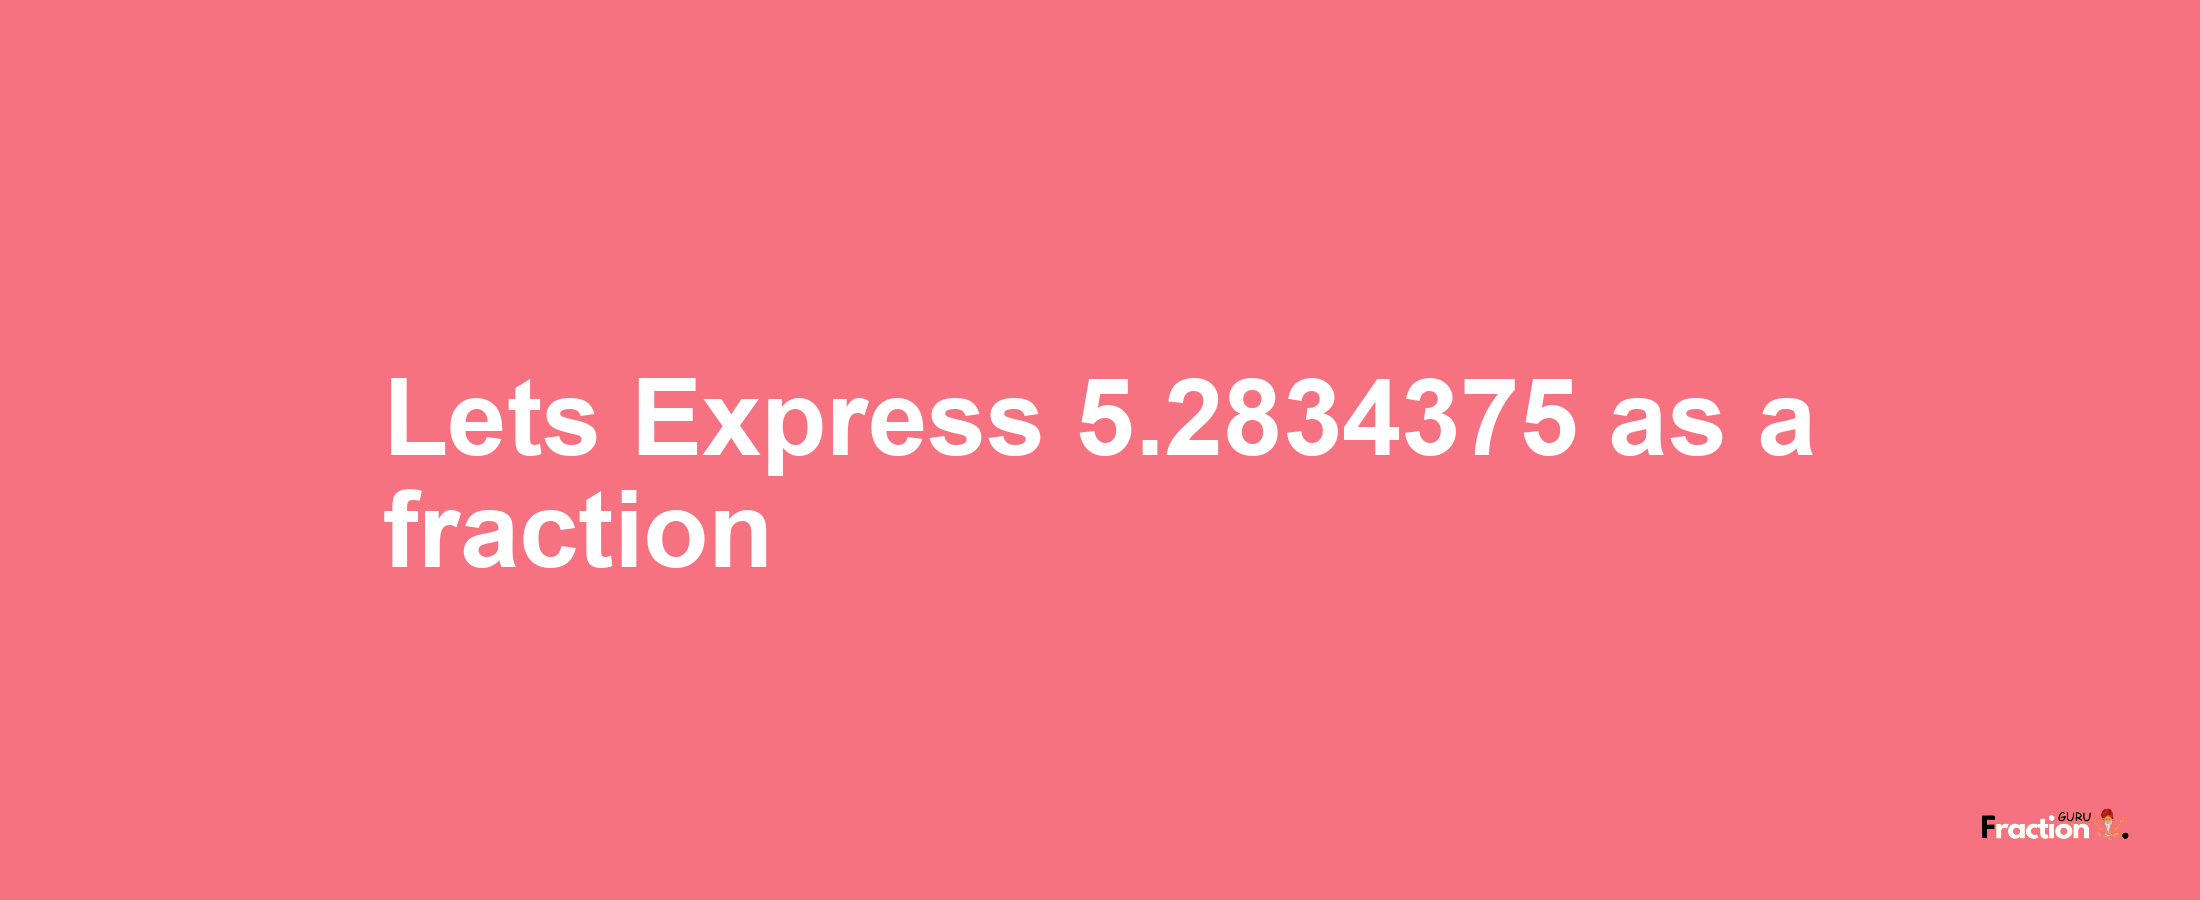 Lets Express 5.2834375 as afraction